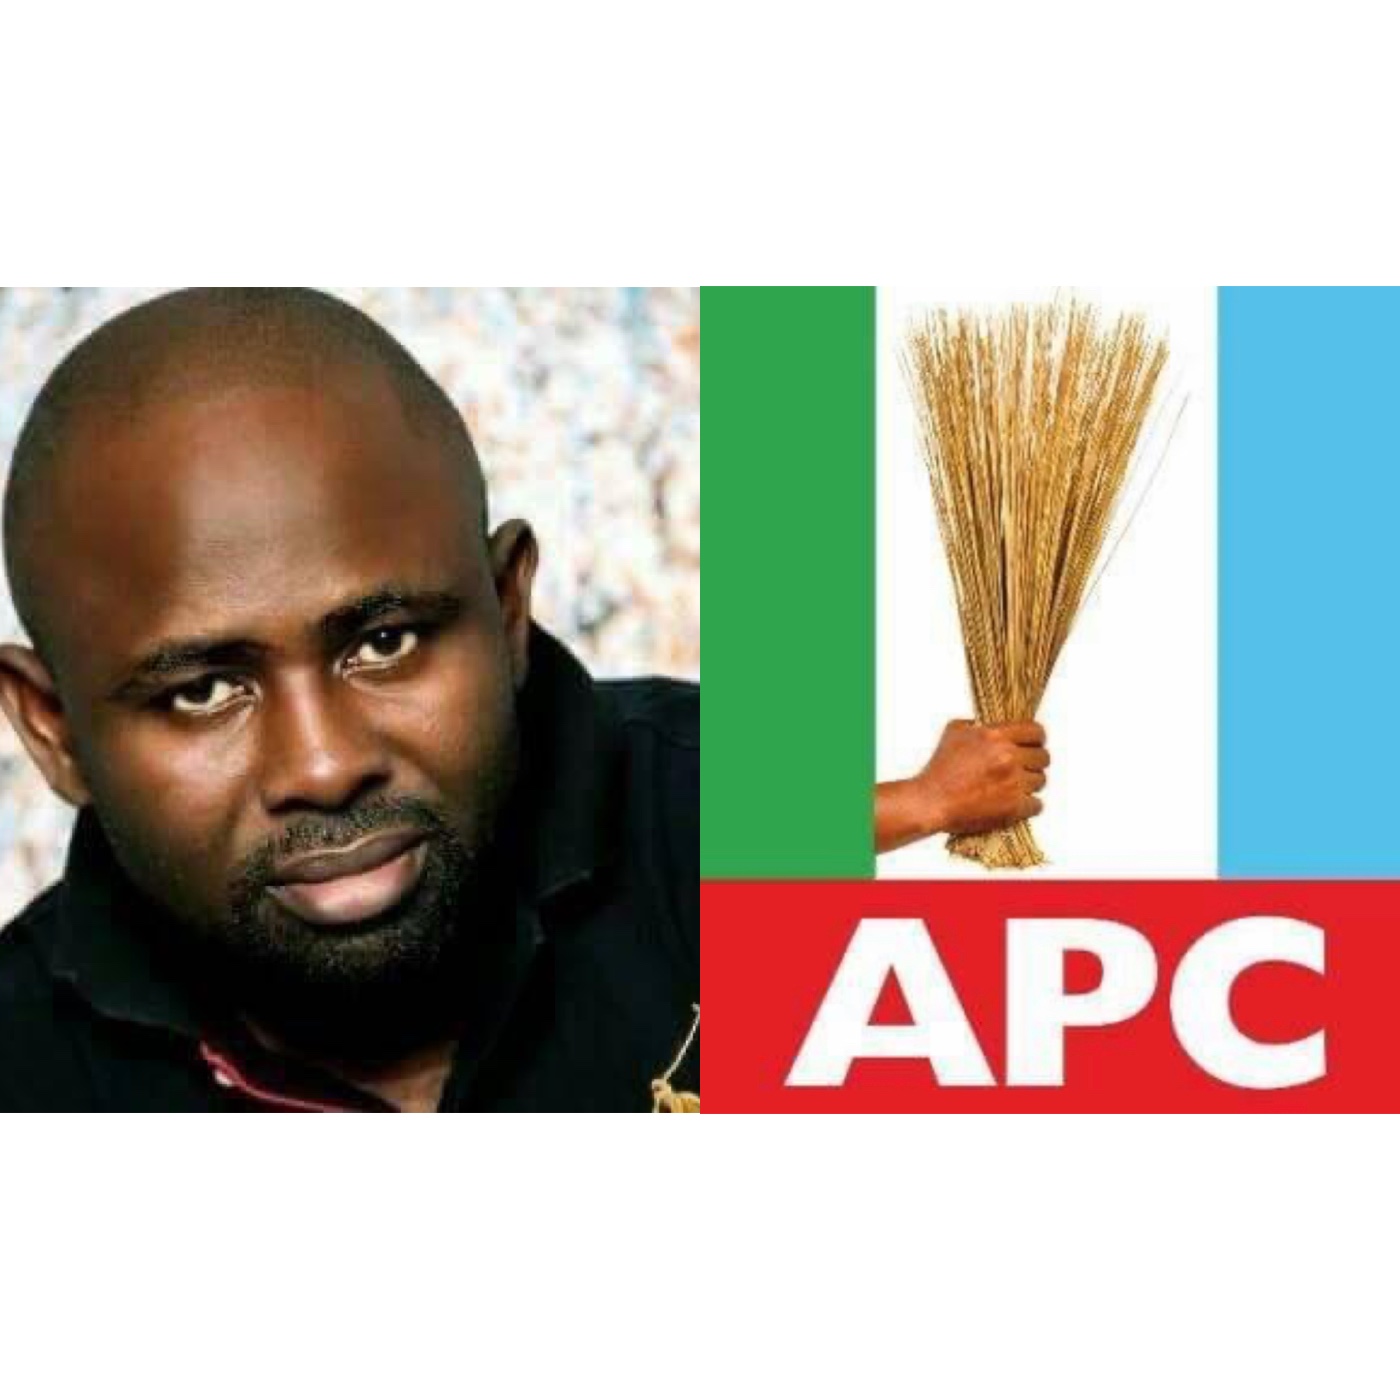 Court orders Hembe to pay Benue APC N50,000 within 7 days, give reasons